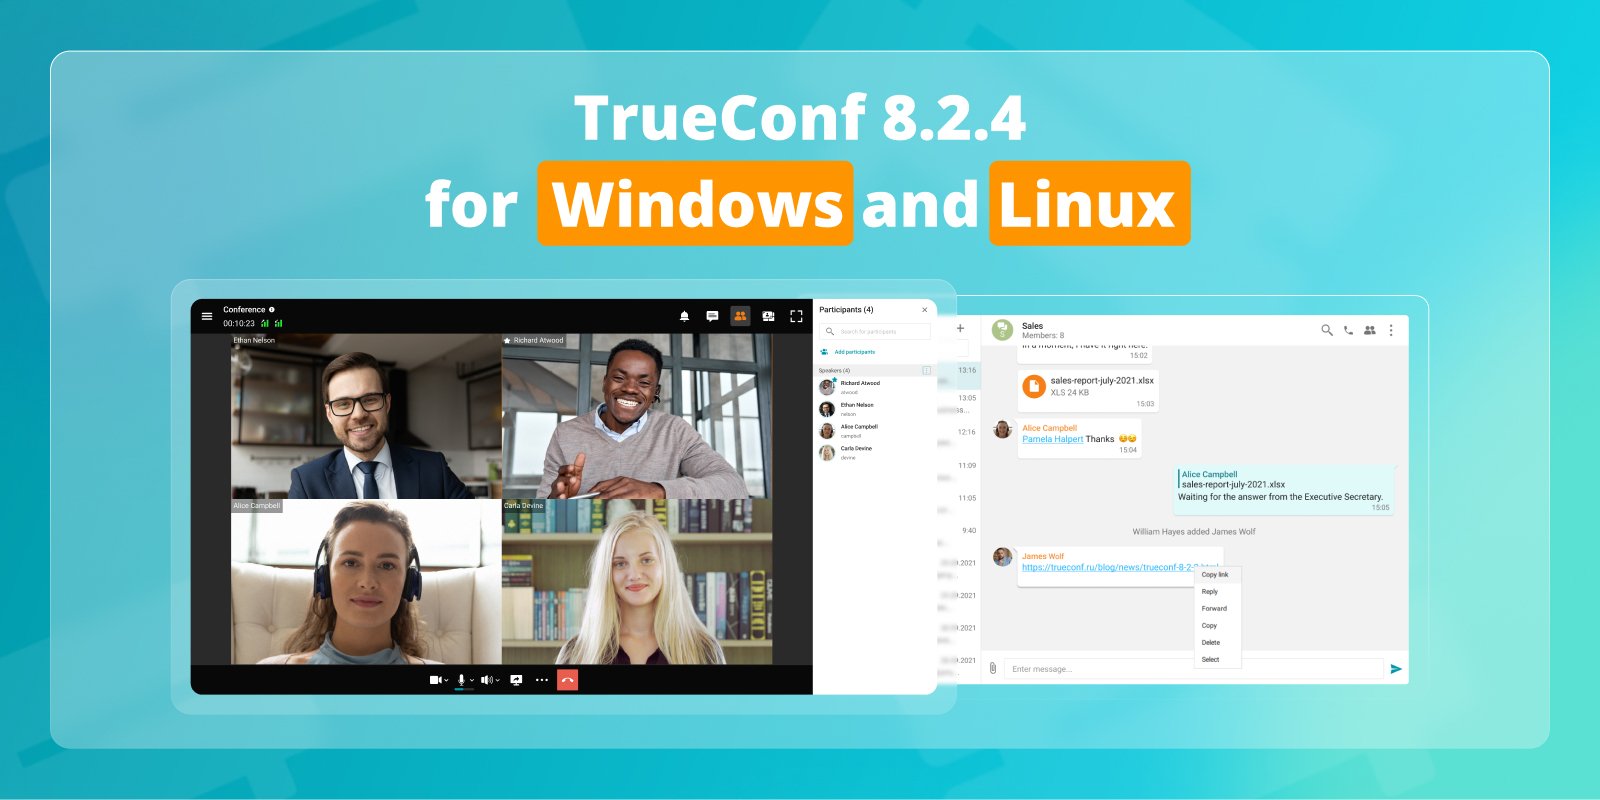 TrueConf 8.2.4 for Windows and Linux: Updates and improvements 4